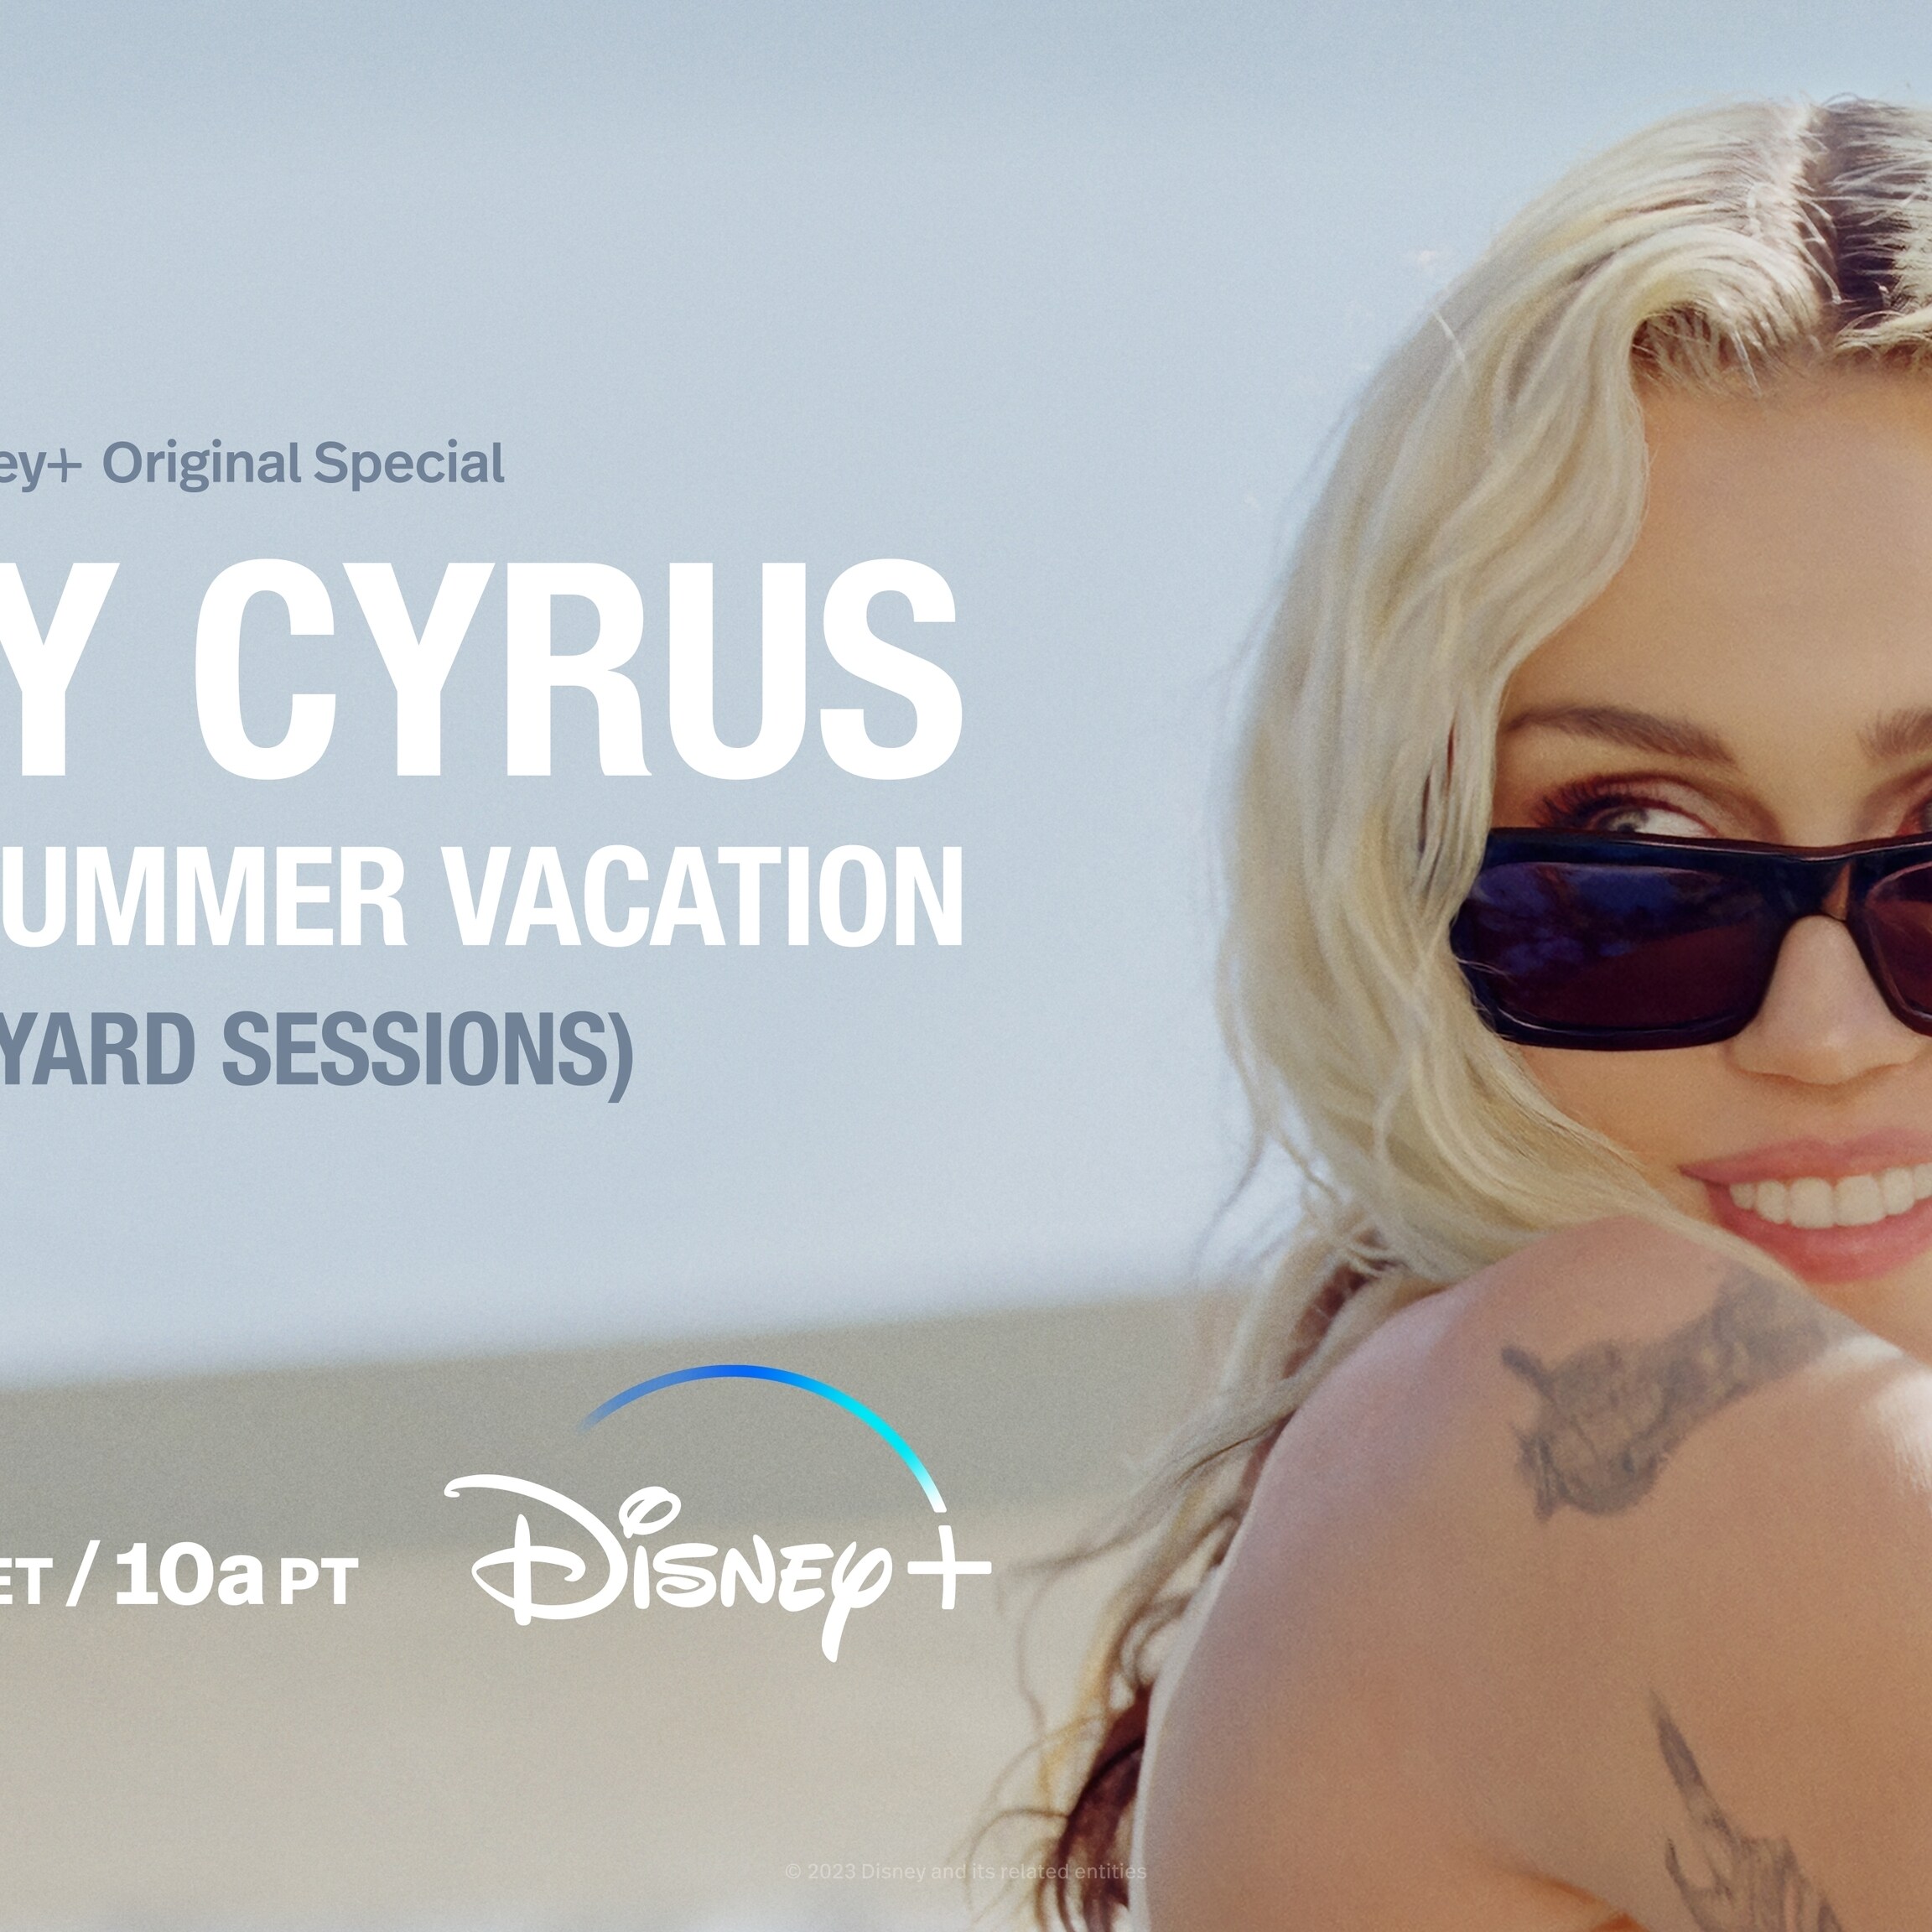 Miley Cyrus & Disney Reunite For The Disney+ Original Special Event: “Miley  Cyrus - Endless Summer Vacation (Backyard Sessions)”